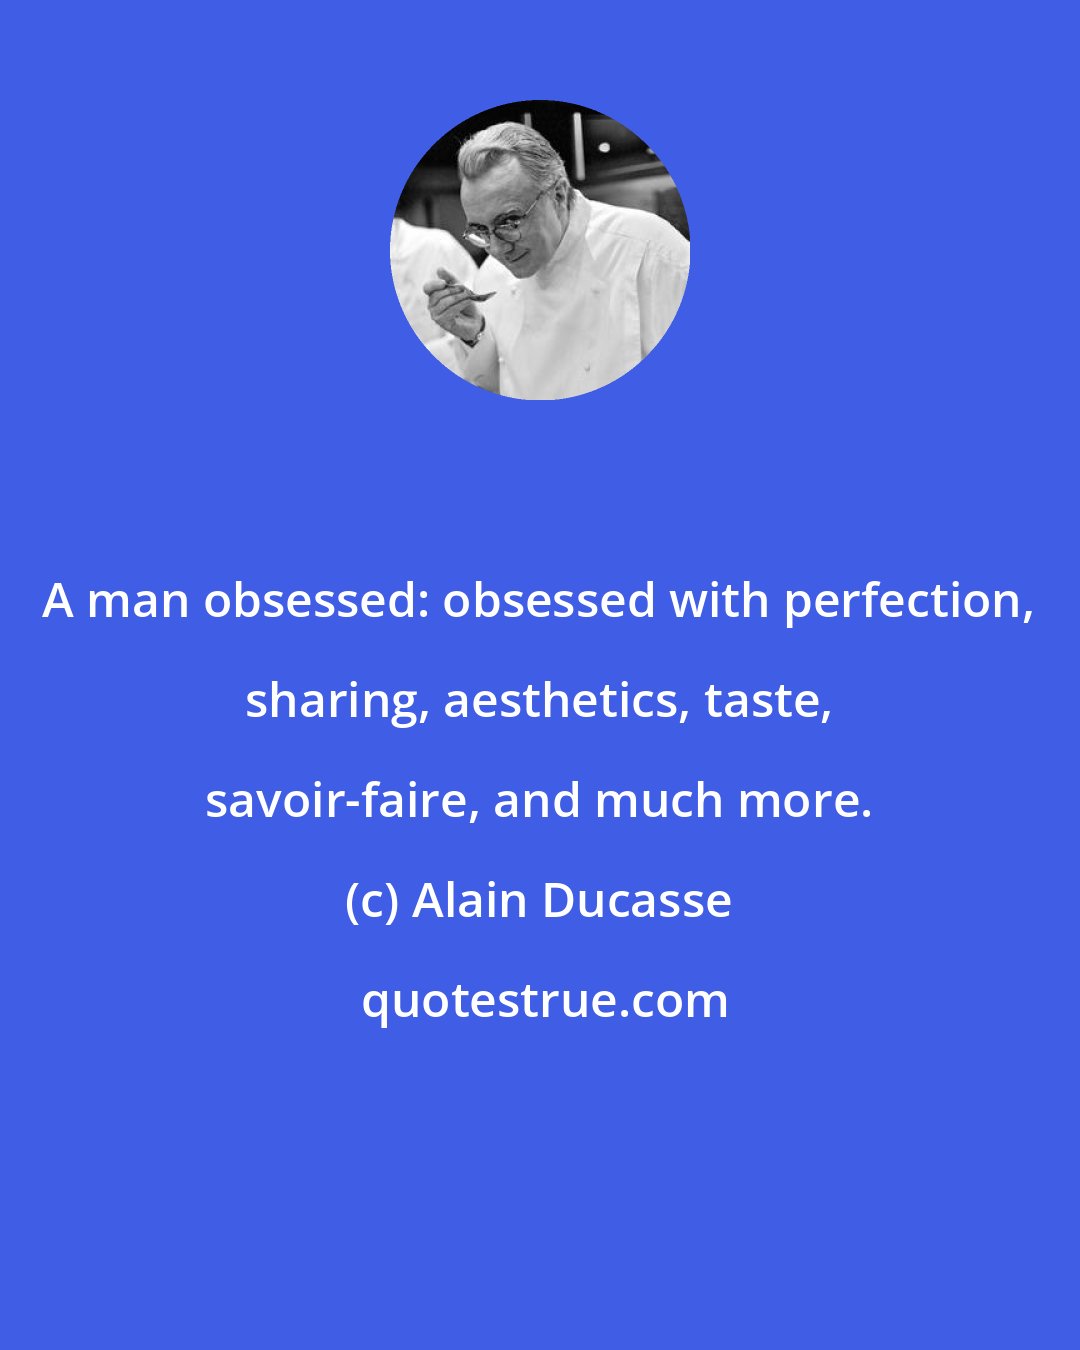 Alain Ducasse: A man obsessed: obsessed with perfection, sharing, aesthetics, taste, savoir-faire, and much more.